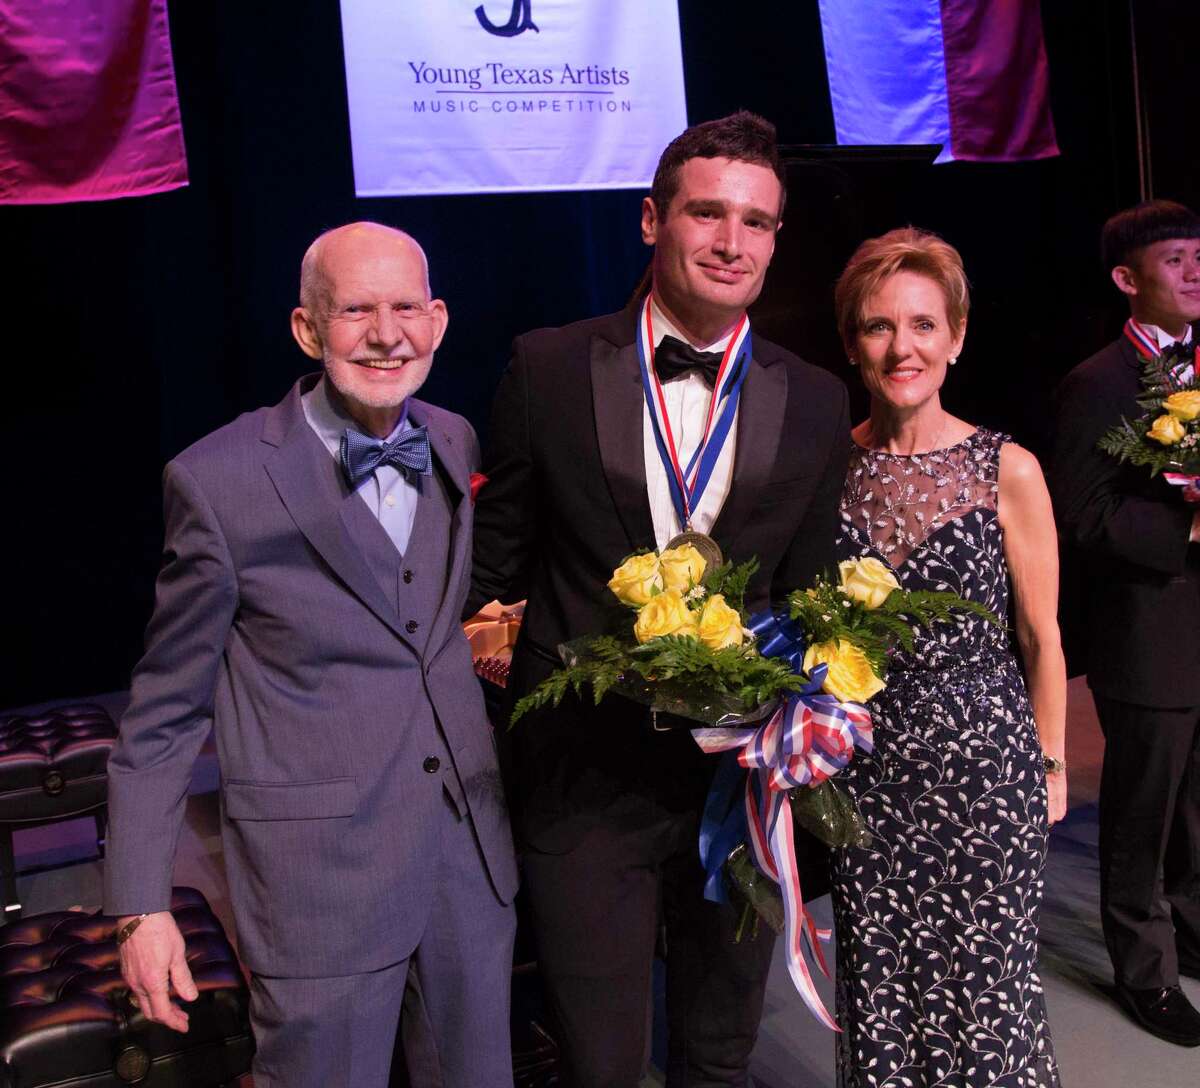 YTA Founder Jim Pokorski, 2019 Grand Prize winner Artem Kuznetsov, and YTA President/CEO Susie Pokorski. After a pause since 2019 due to the COVID-19 pandemic the Young Texas Artists Music Competition and Awards returns to downtown Conroe March 10-12.